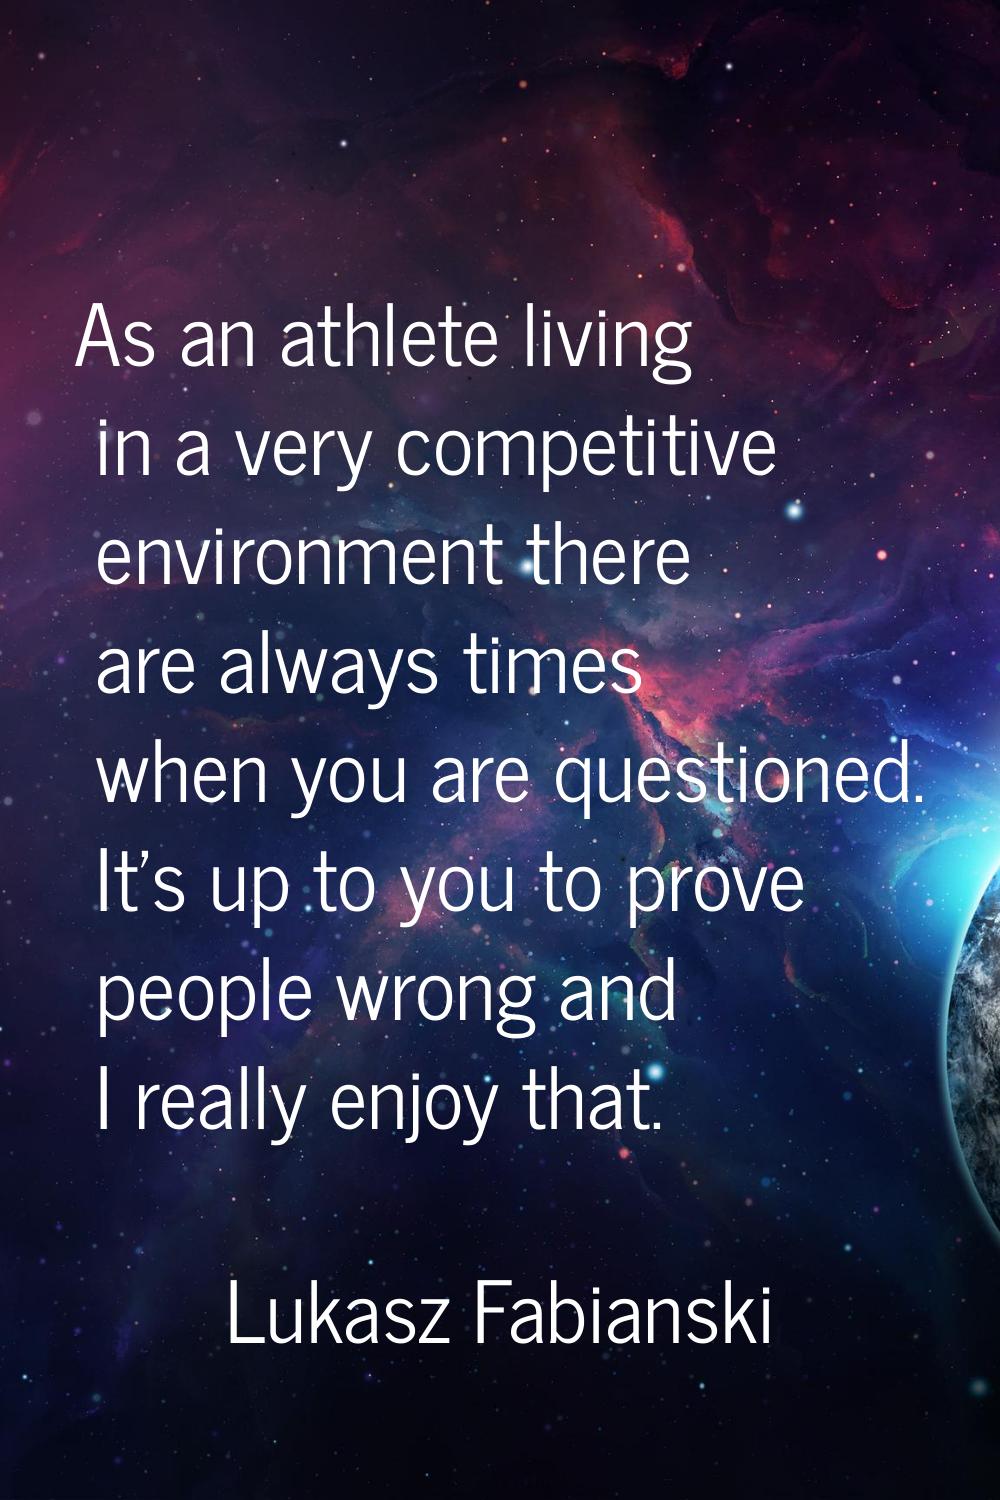 As an athlete living in a very competitive environment there are always times when you are question